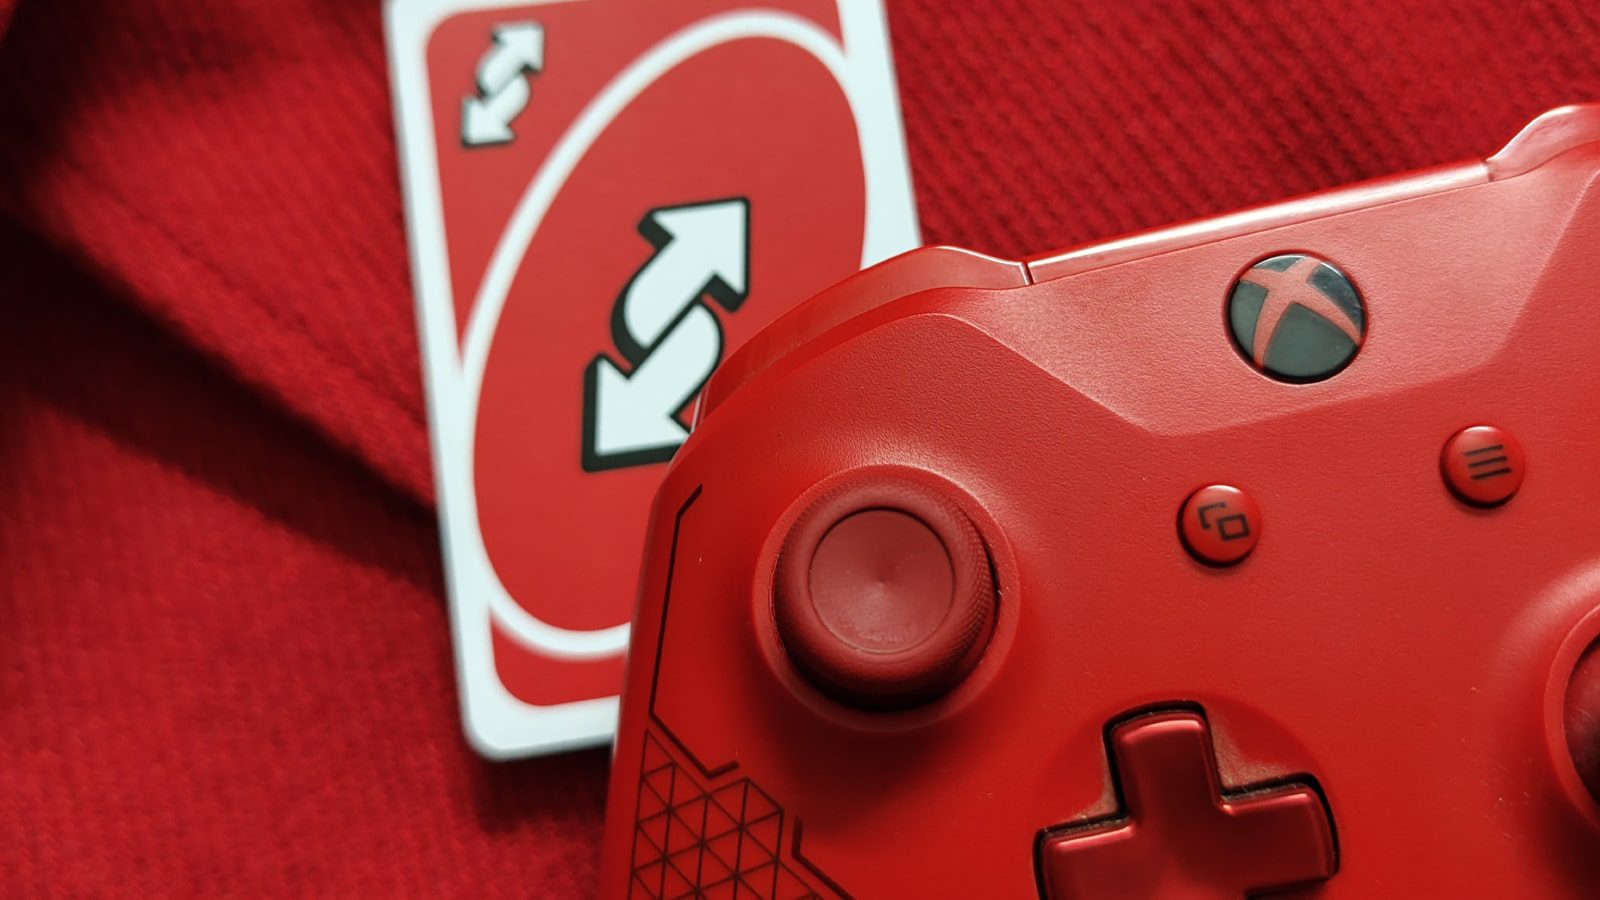 A red Xbox controller and Uno reverse card.